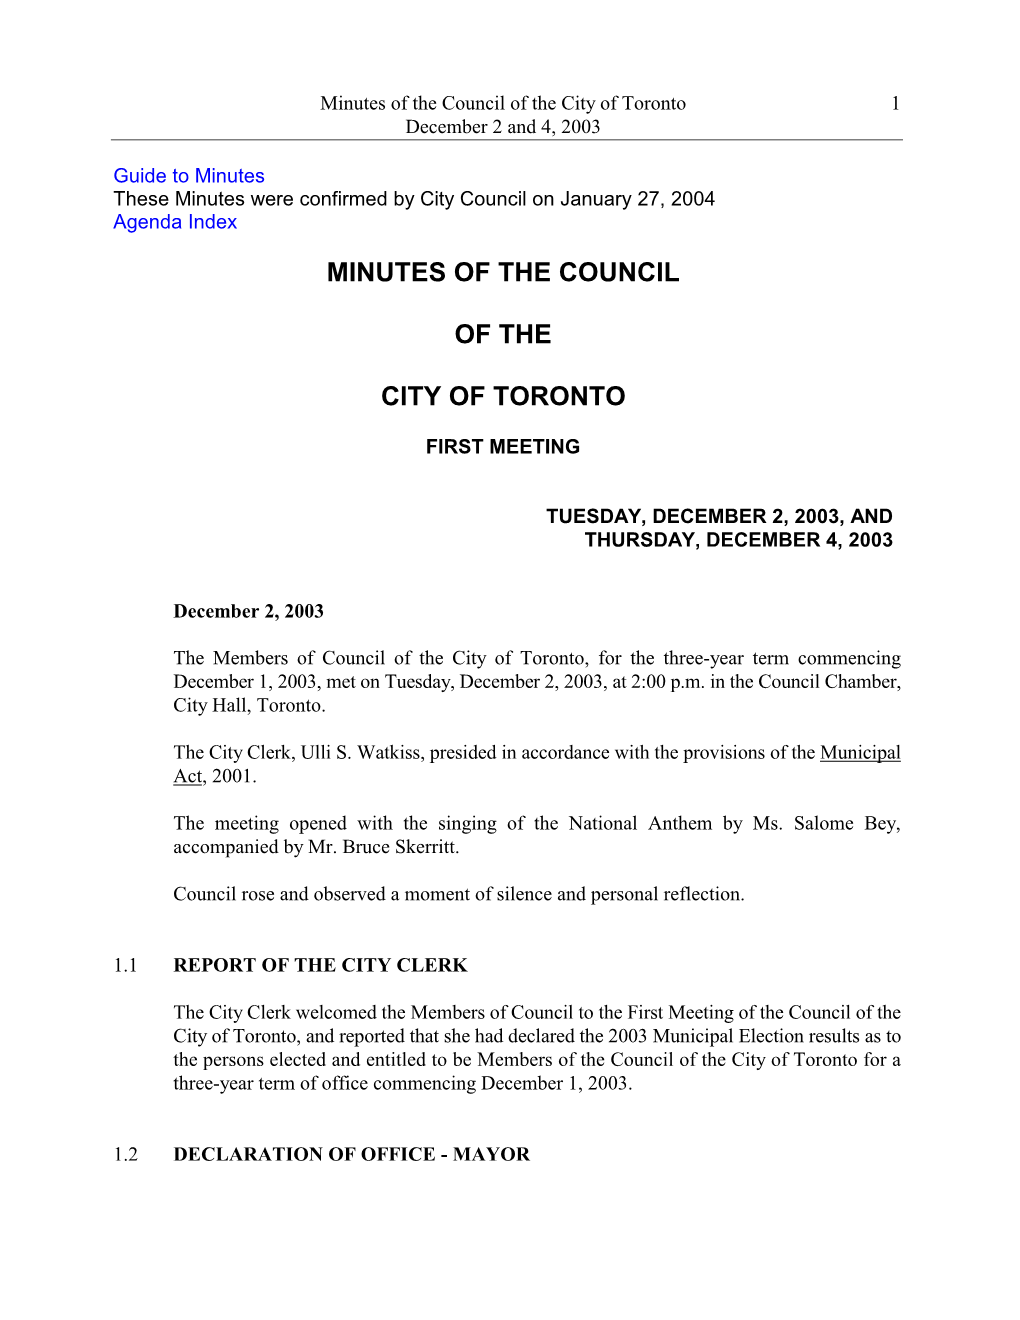 These Minutes Are Subject to Confirmation by City Council